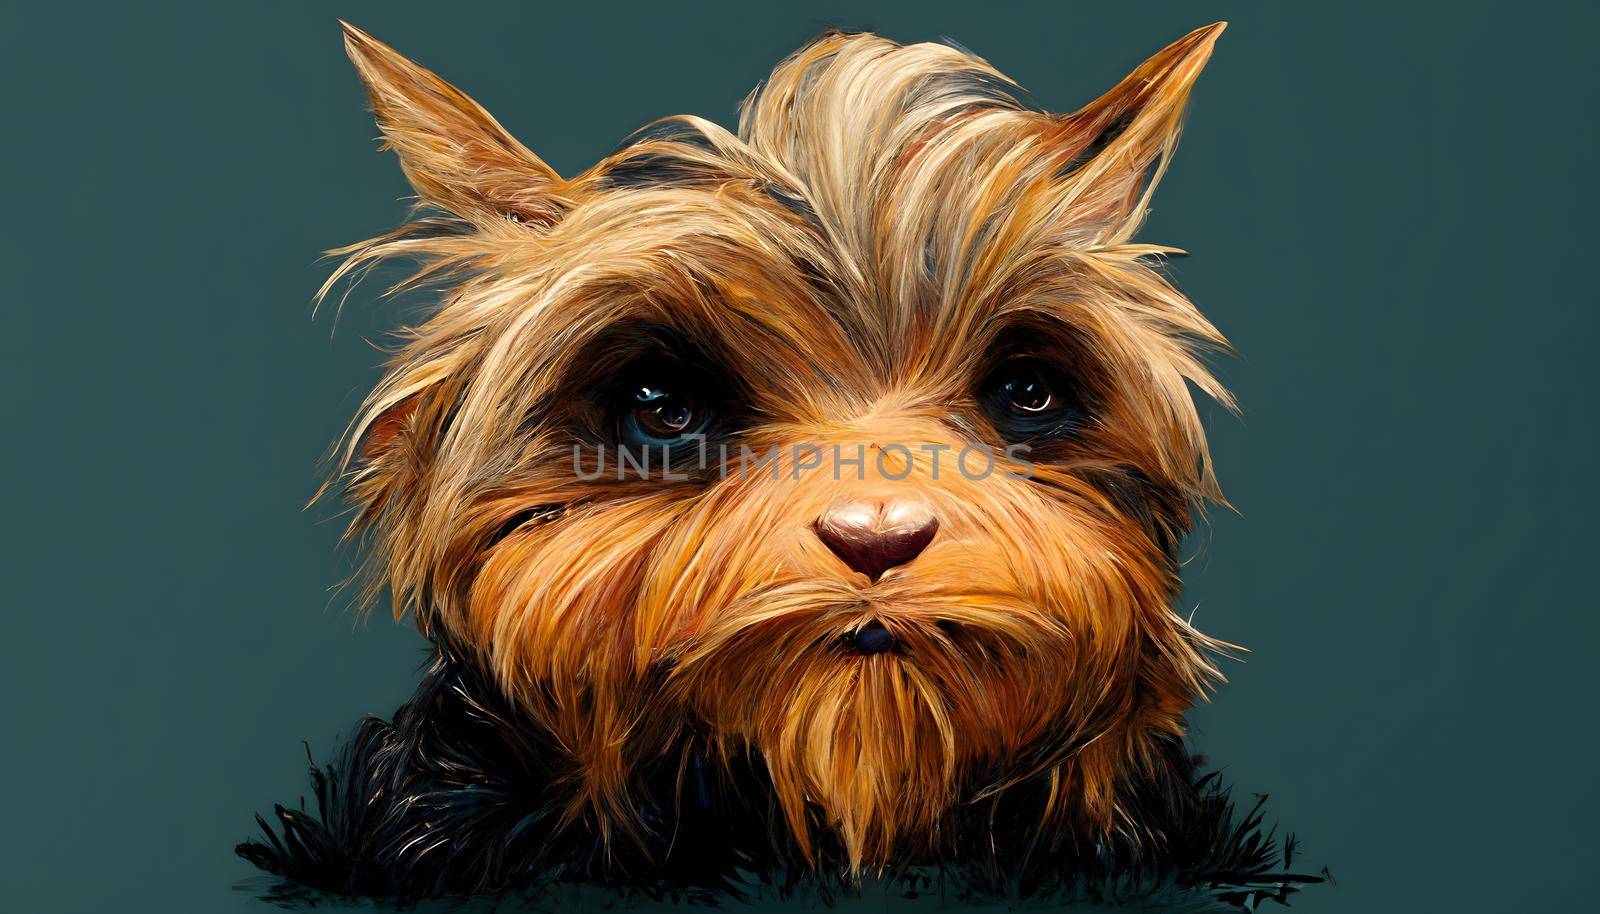 portrait of yorkshire terrier, neural network generated art. Digitally generated image. Not based on any actual scene or pattern.